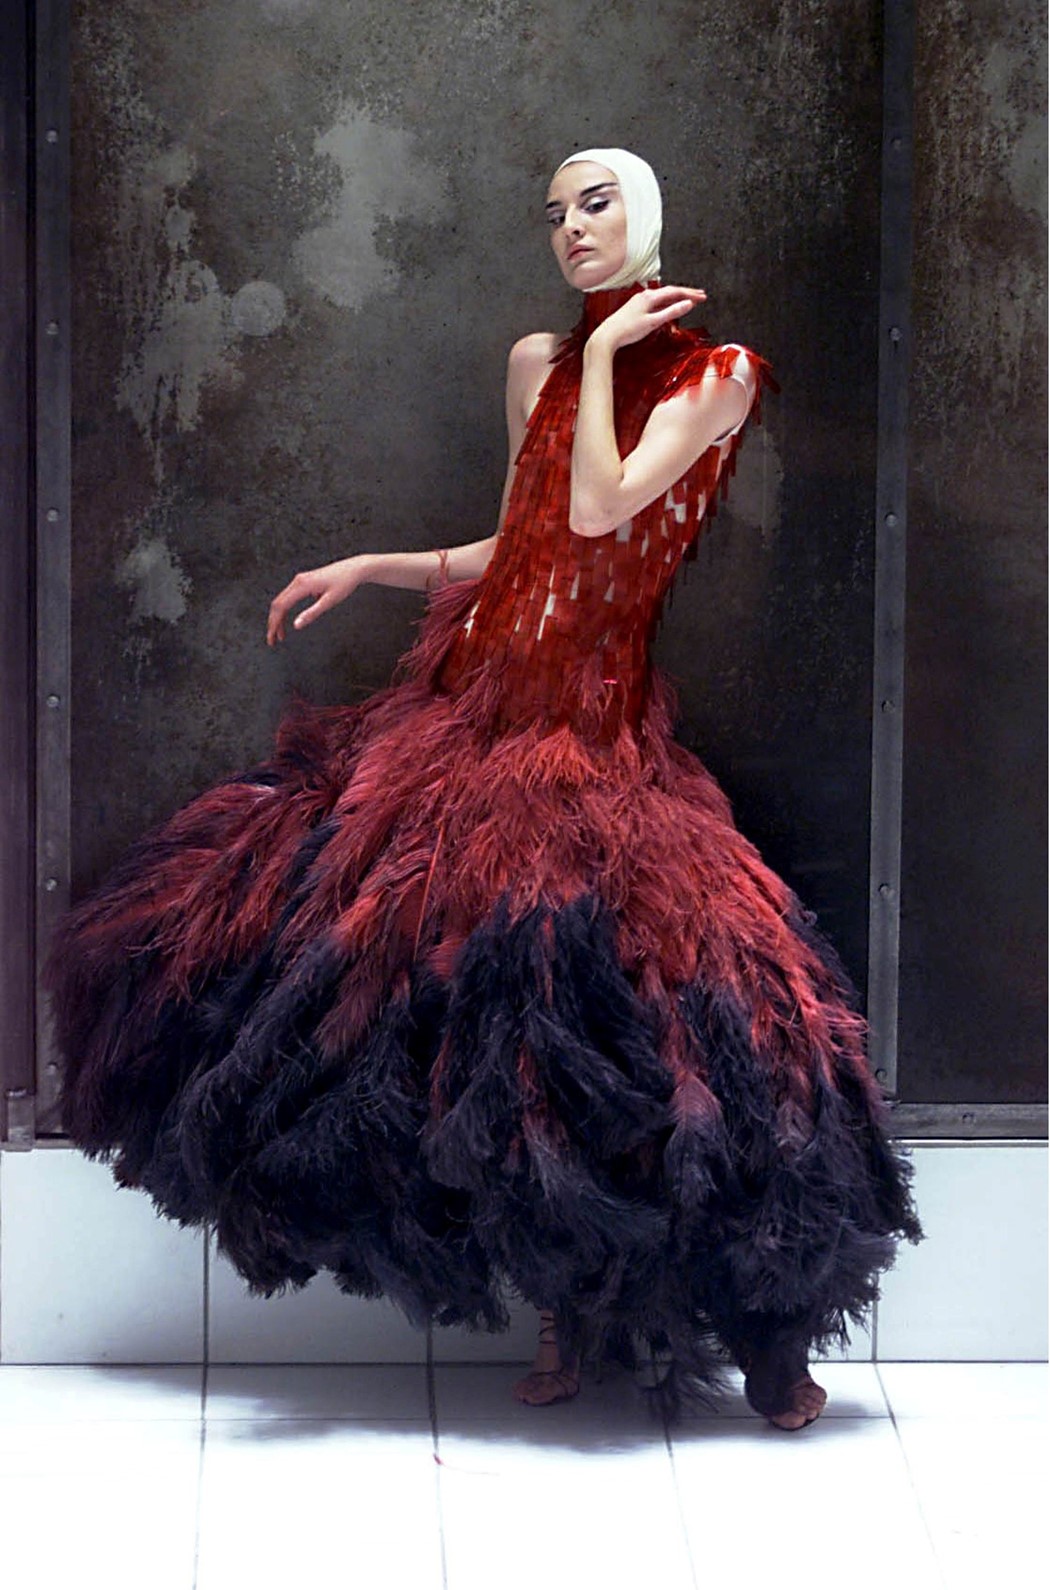 Gainsbury & Whiting on Alexander McQueen